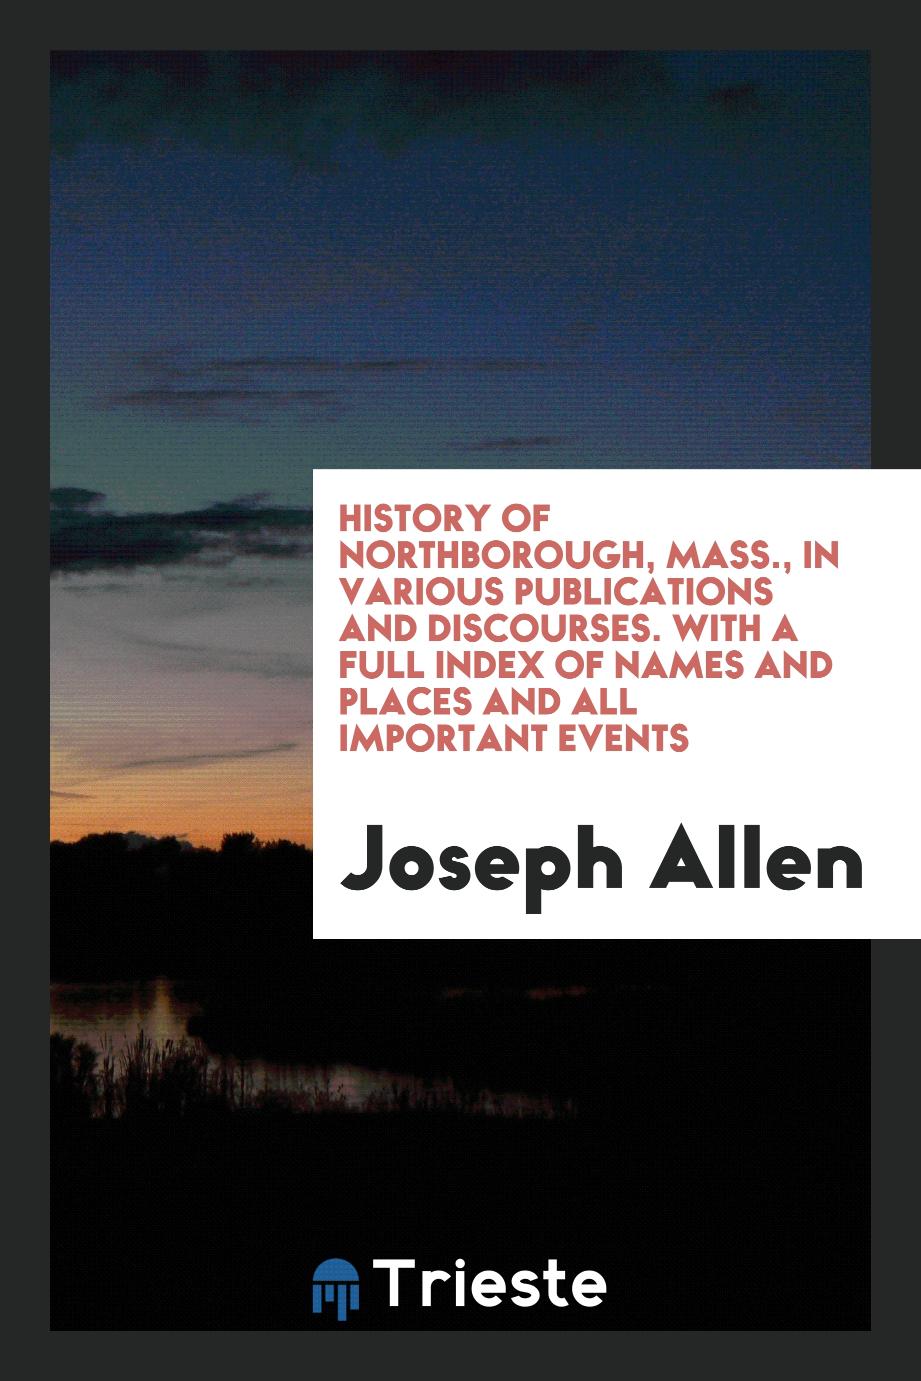 History of Northborough, Mass., in Various Publications and Discourses. With a Full Index of Names and Places and All Important Events